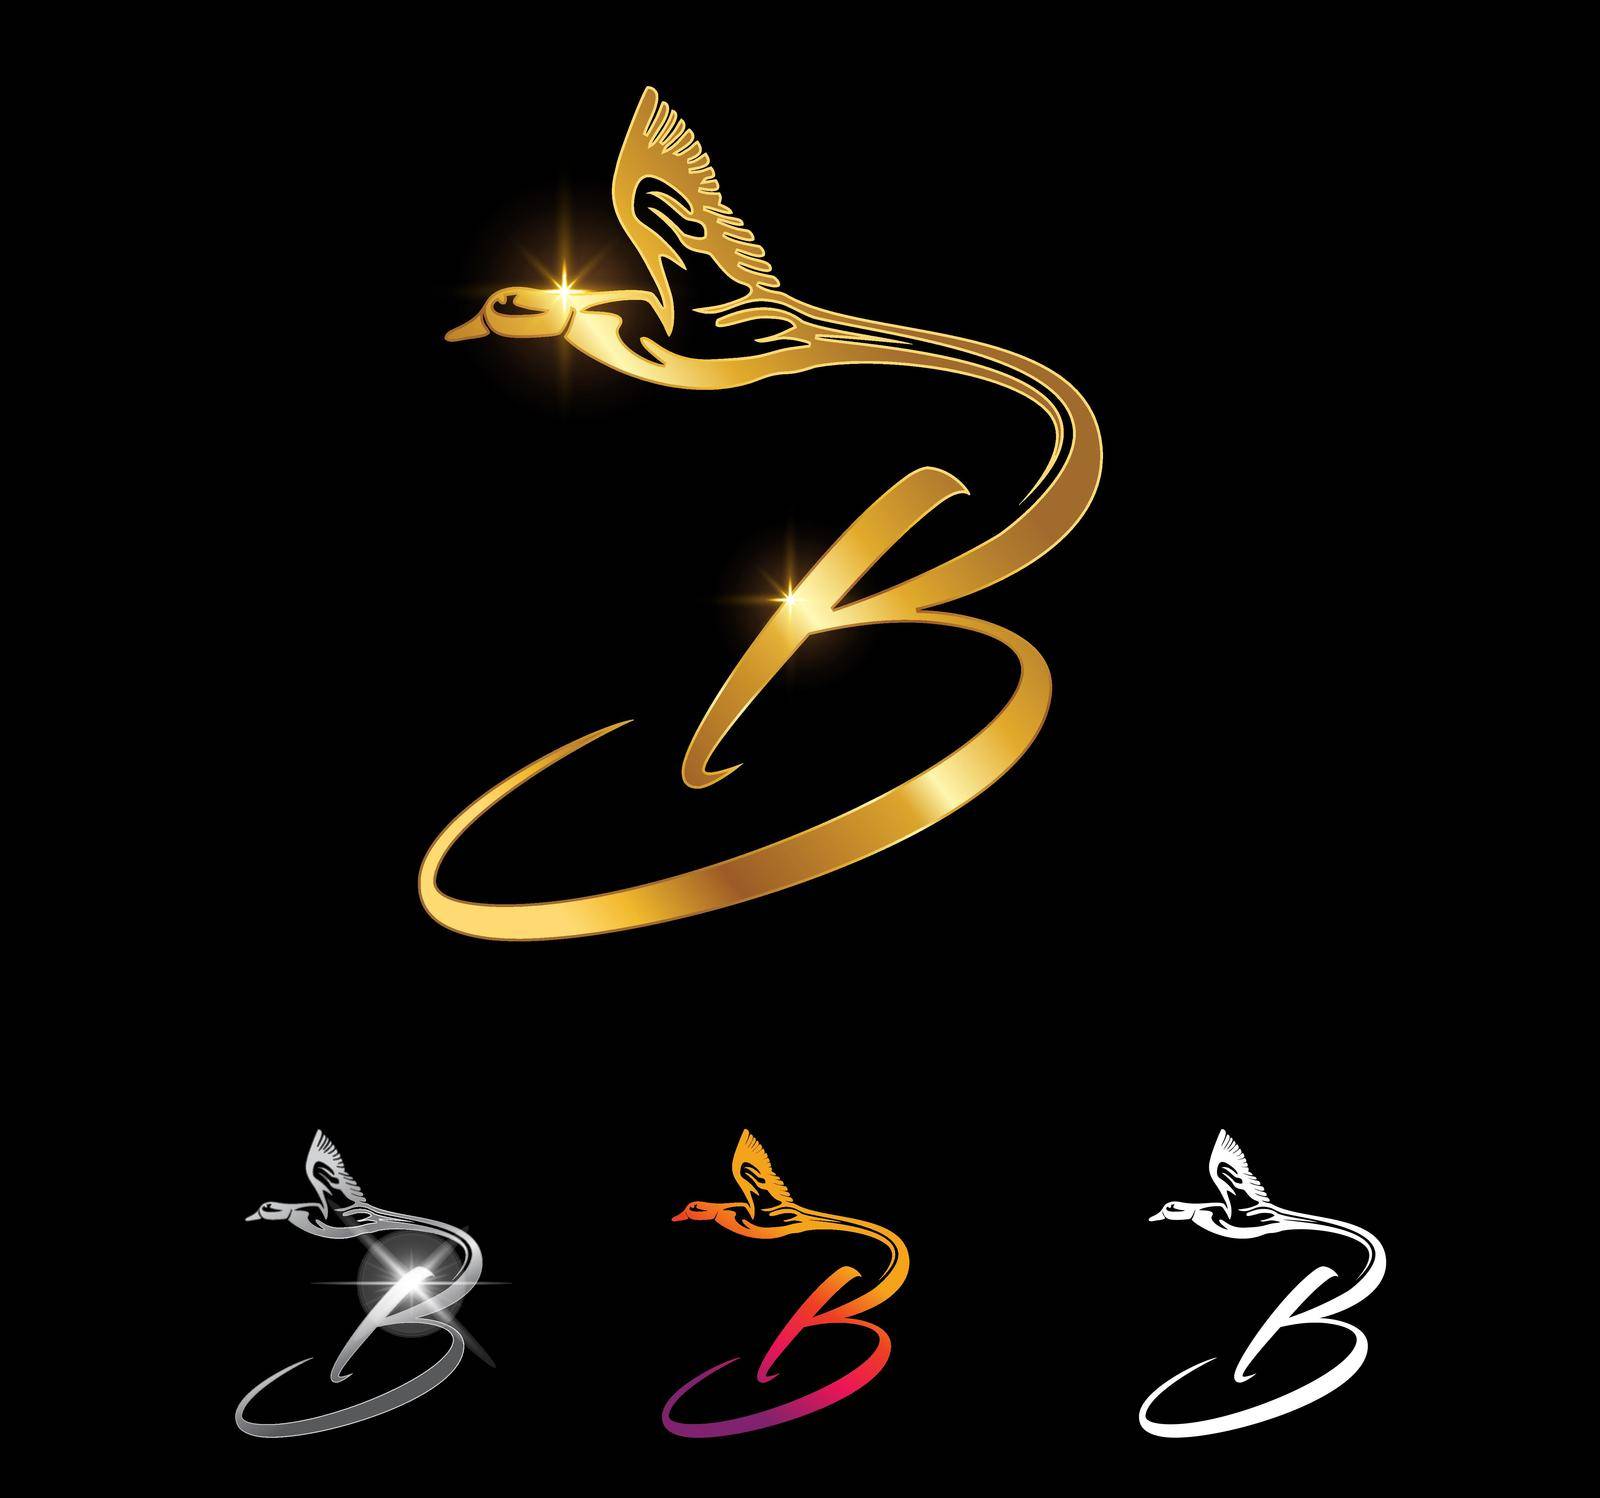 Golden Duck Monogram Initial Letter B by Up2date